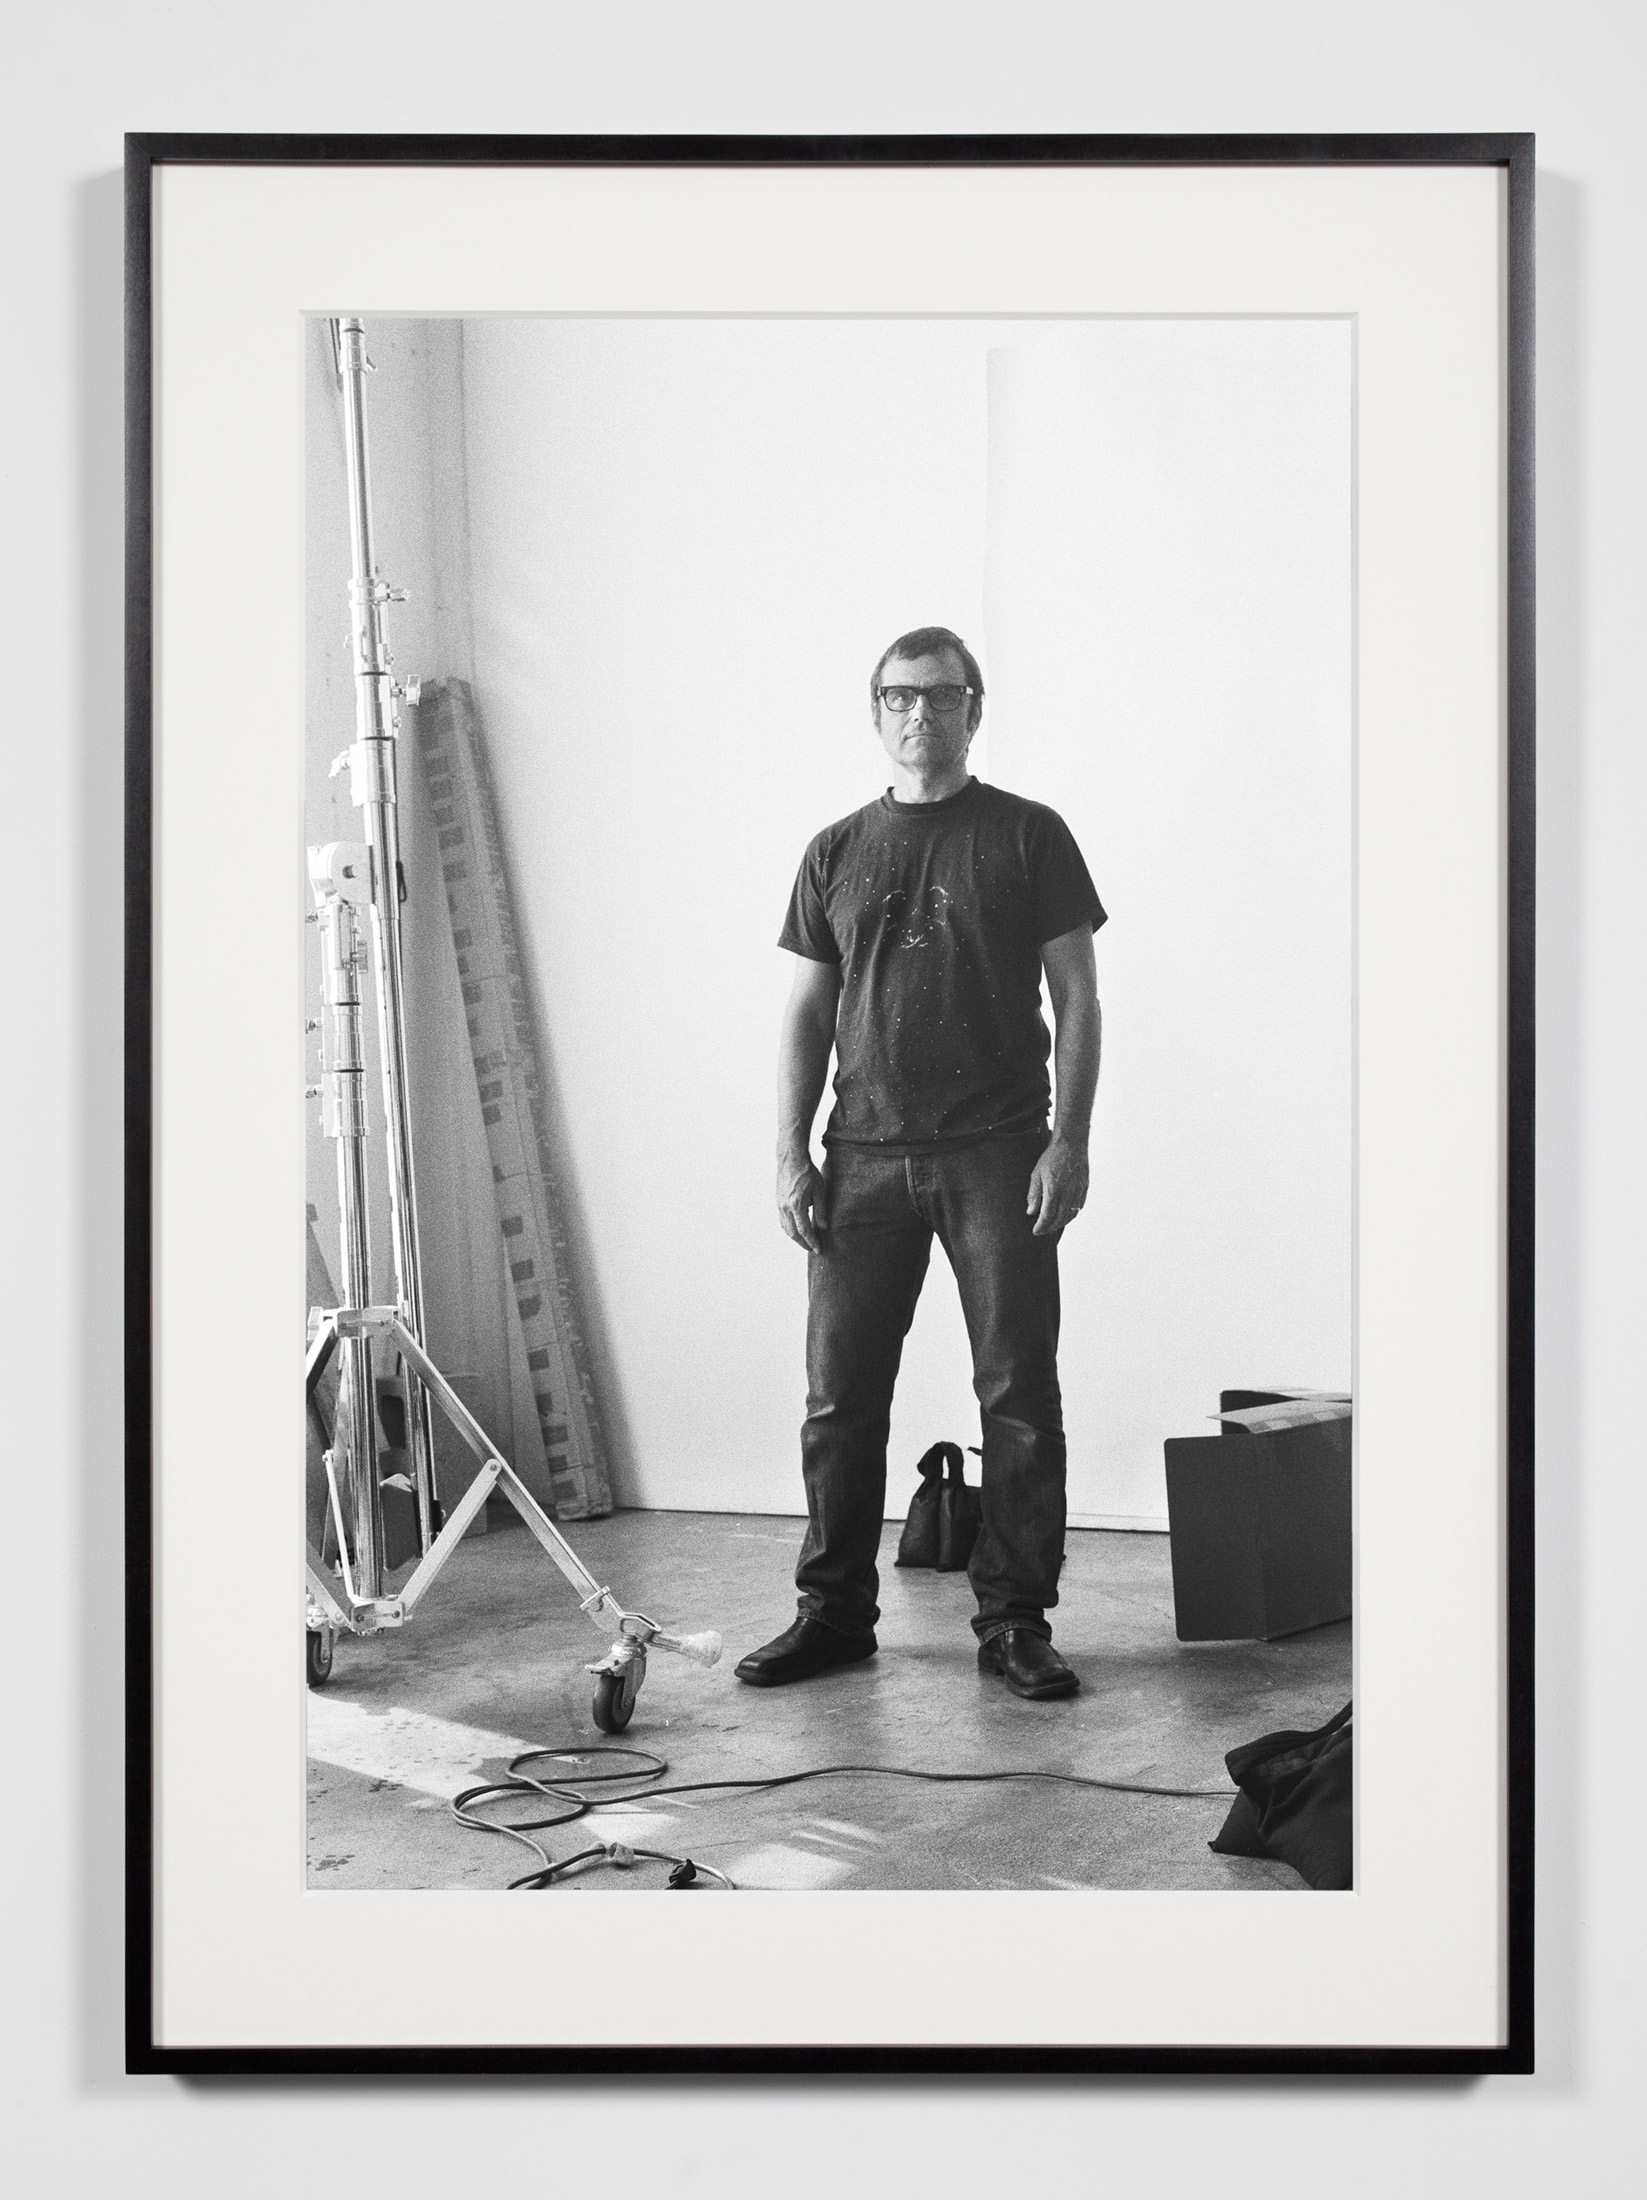   Photographer, Los Angeles, California, June 3, 2009   2011  Epson Ultrachrome K3 archival ink jet print on Hahnemühle Photo Rag paper  36 3/8 x 26 3/8 inches   Industrial Portraits, 2008–    A Diagram of Forces, 2011     